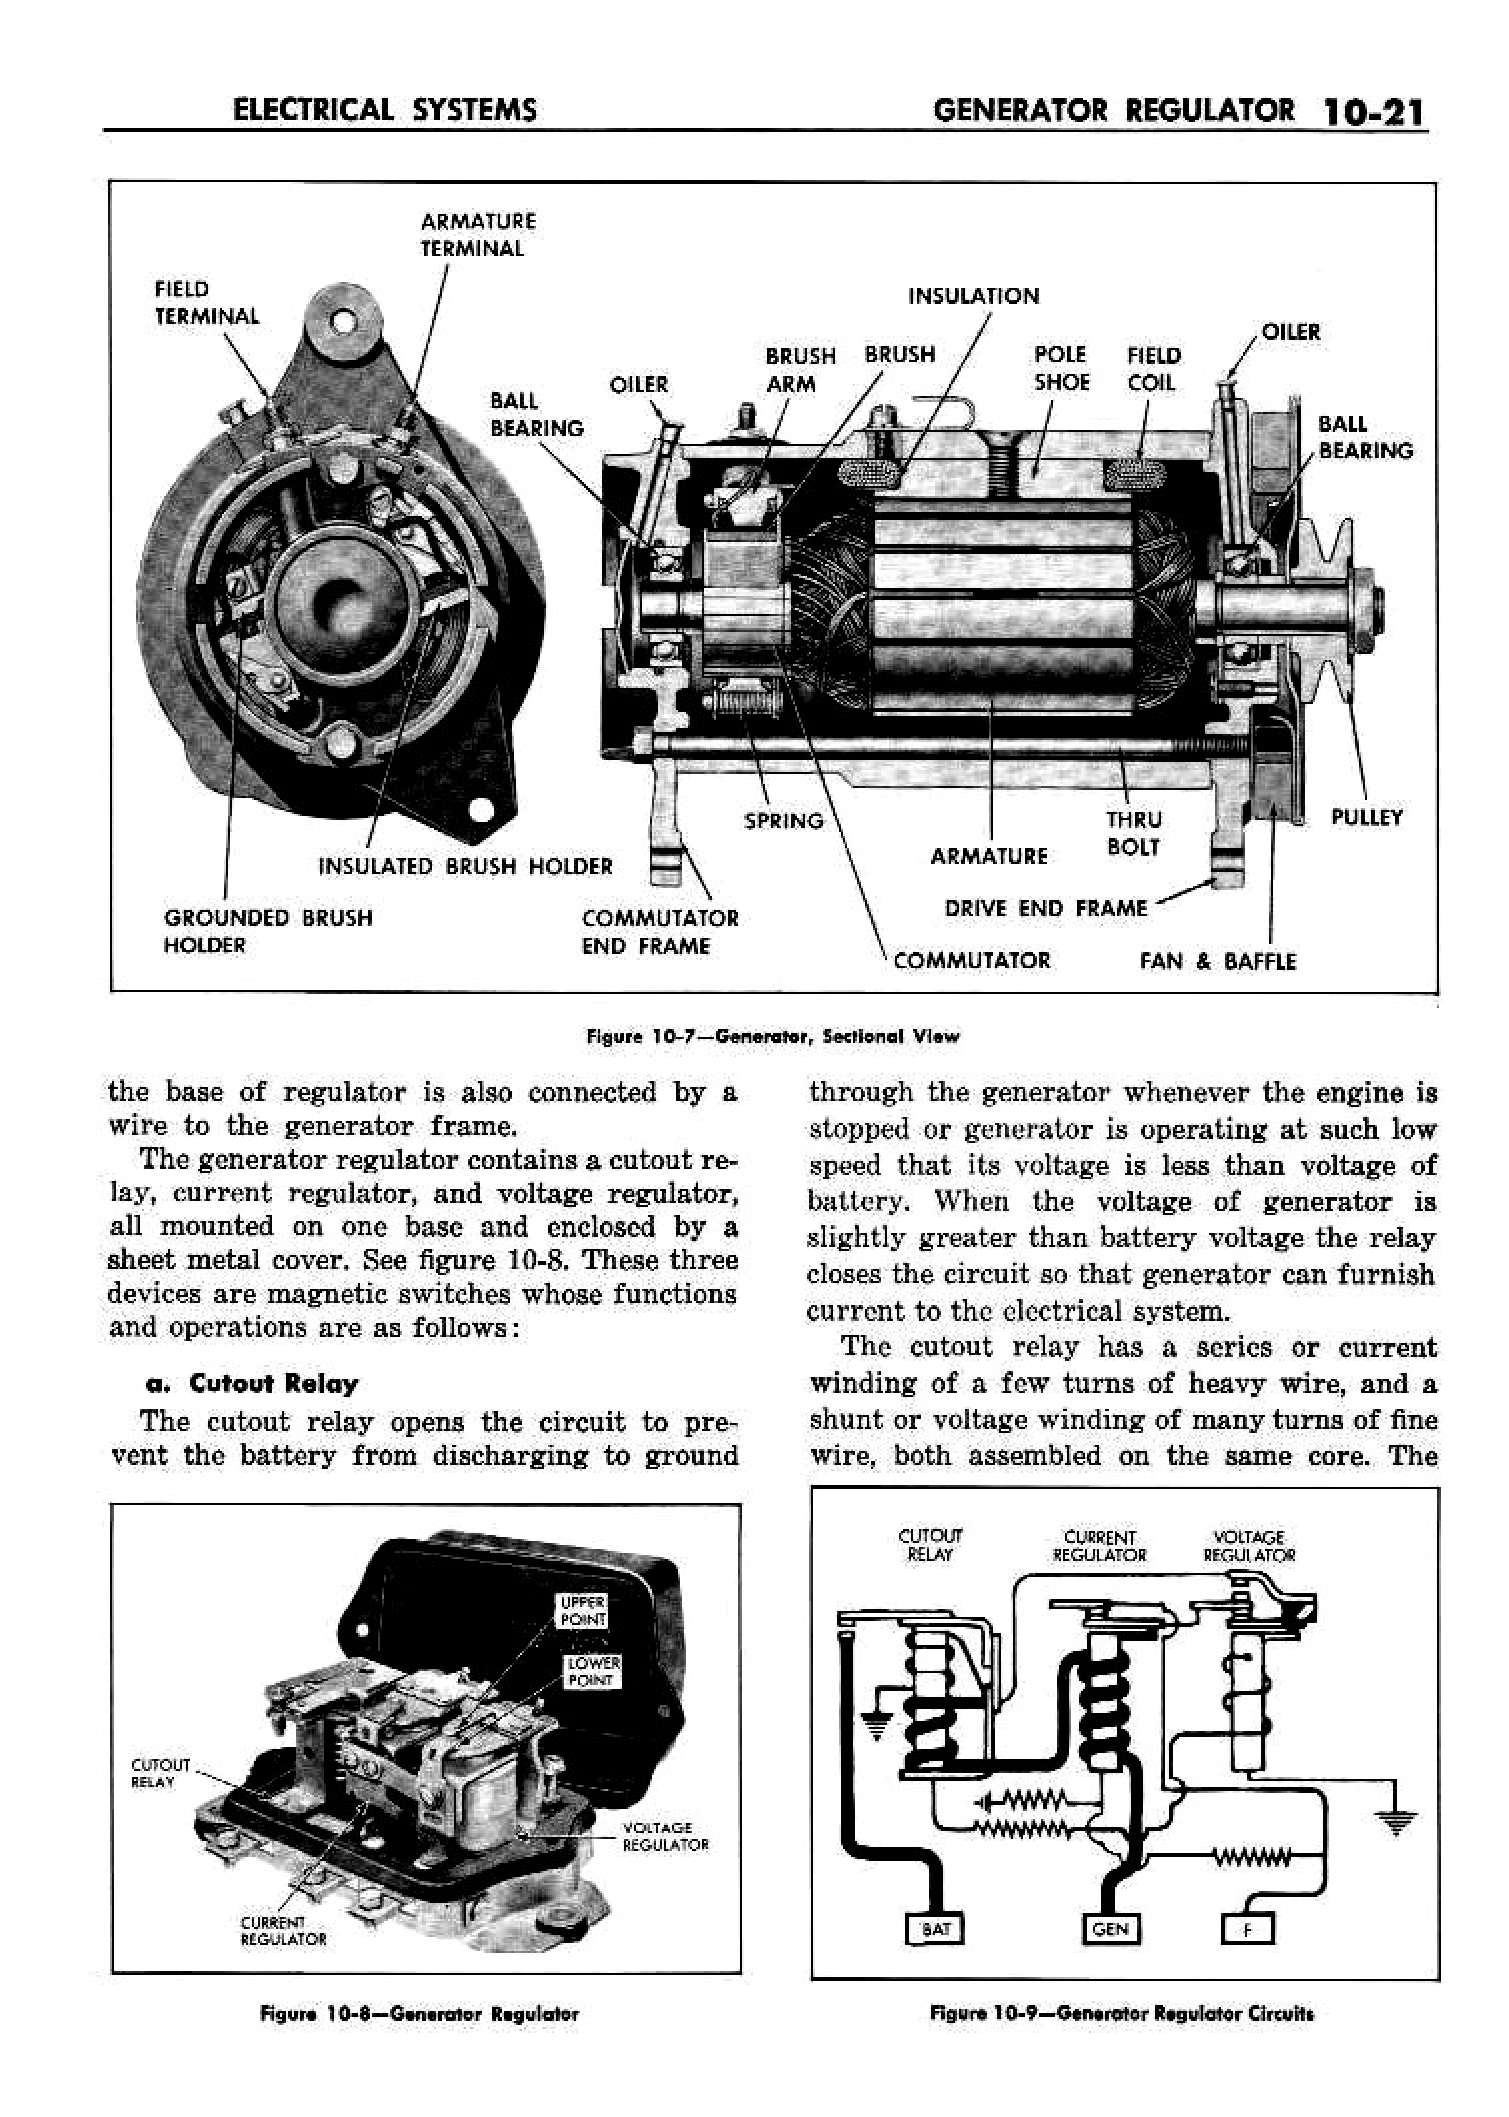 n_11 1958 Buick Shop Manual - Electrical Systems_21.jpg